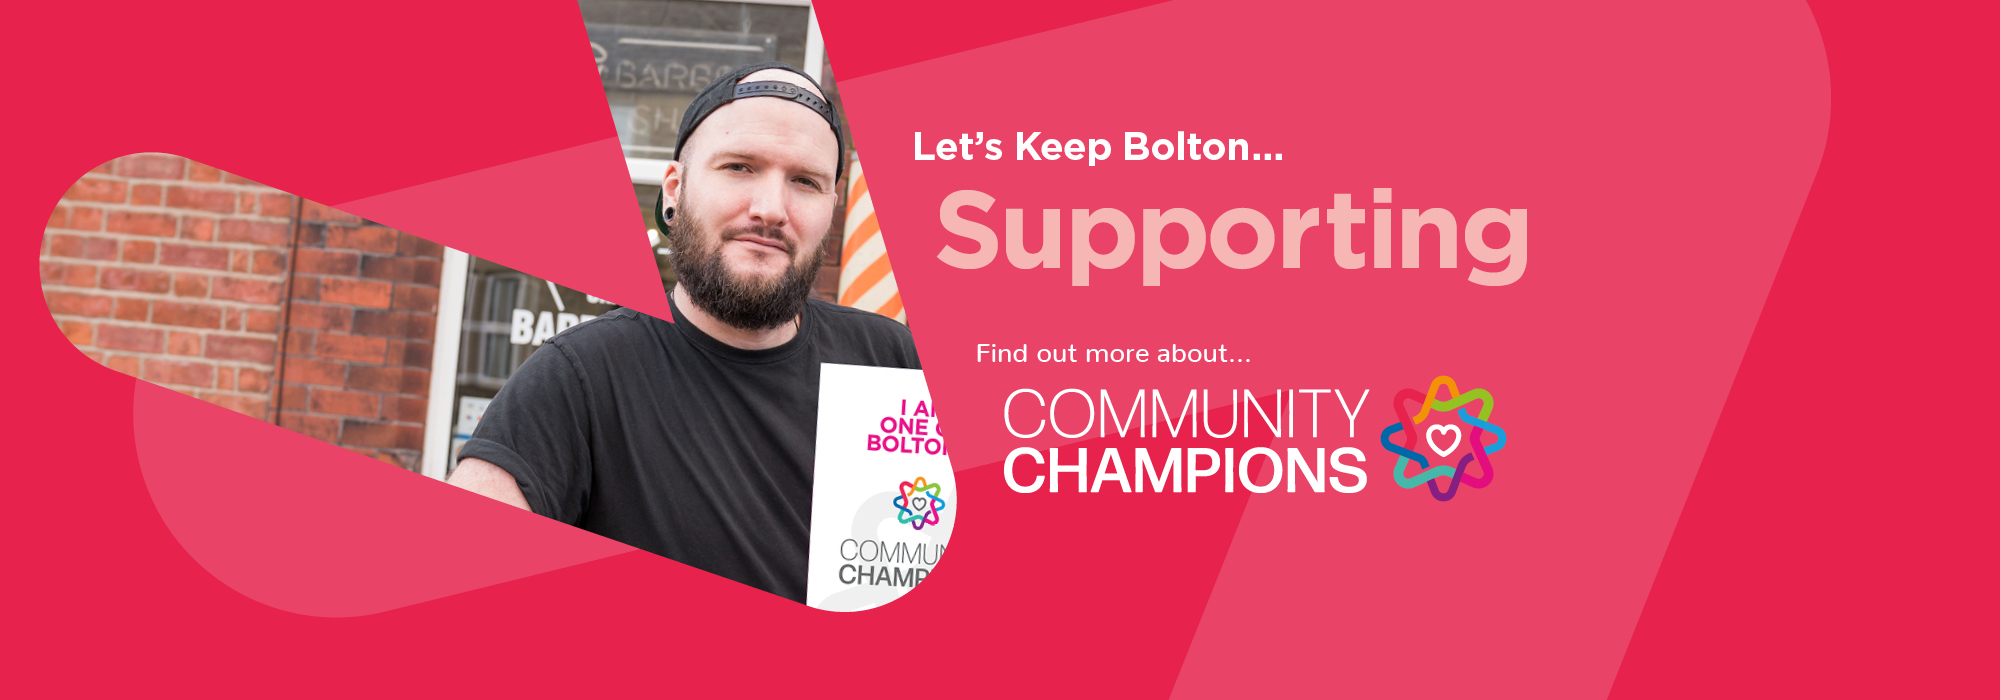 Let's Keep Bolton Supporting - find out more about Bolton Community Champions.